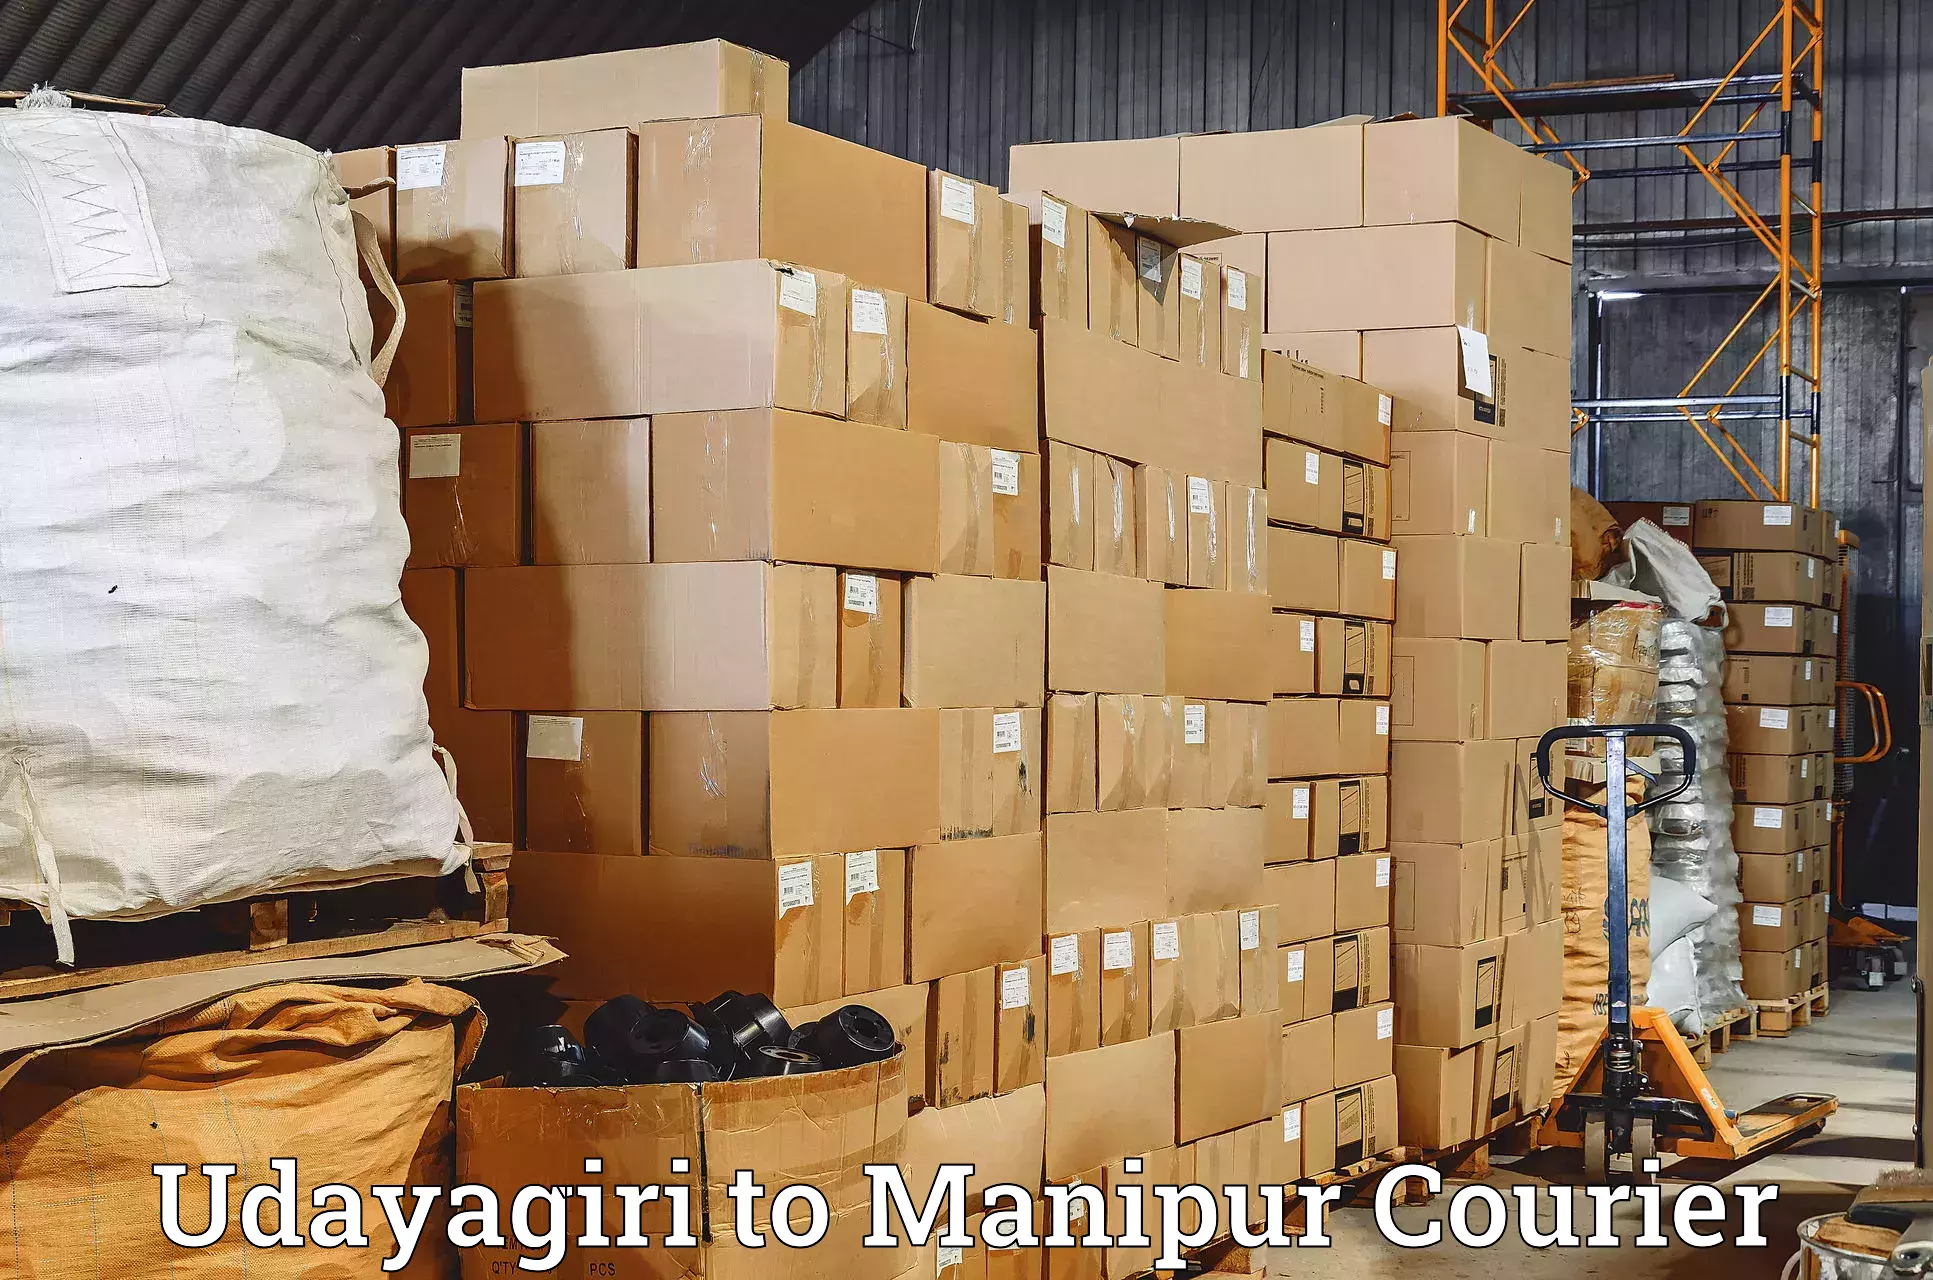 Courier service comparison in Udayagiri to Ukhrul